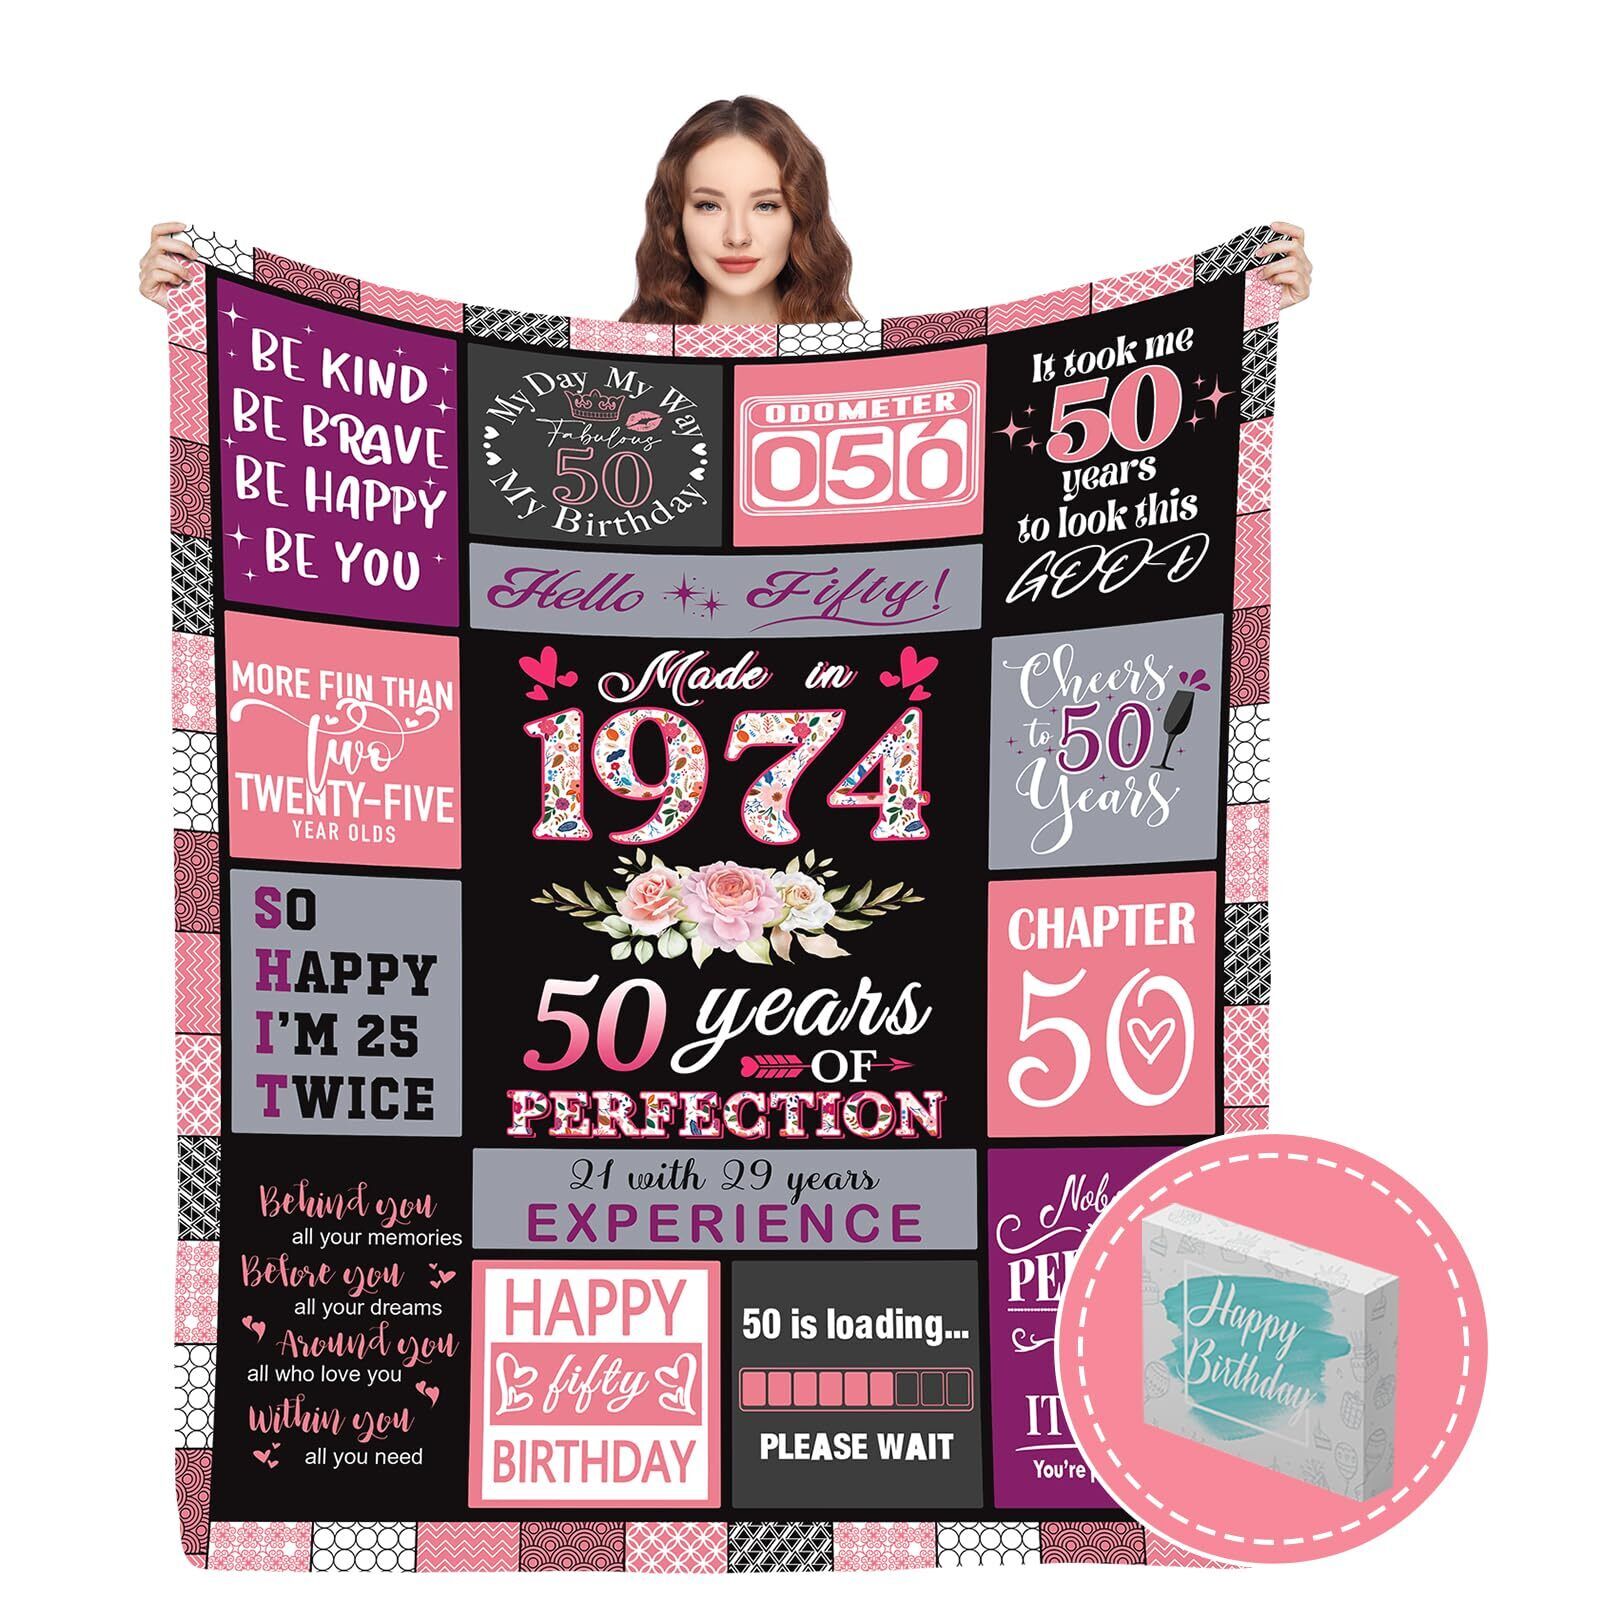 50th Birthday Gifts for Women 50th Birthday Gifts Blanket 50 Year Old Gifts f...